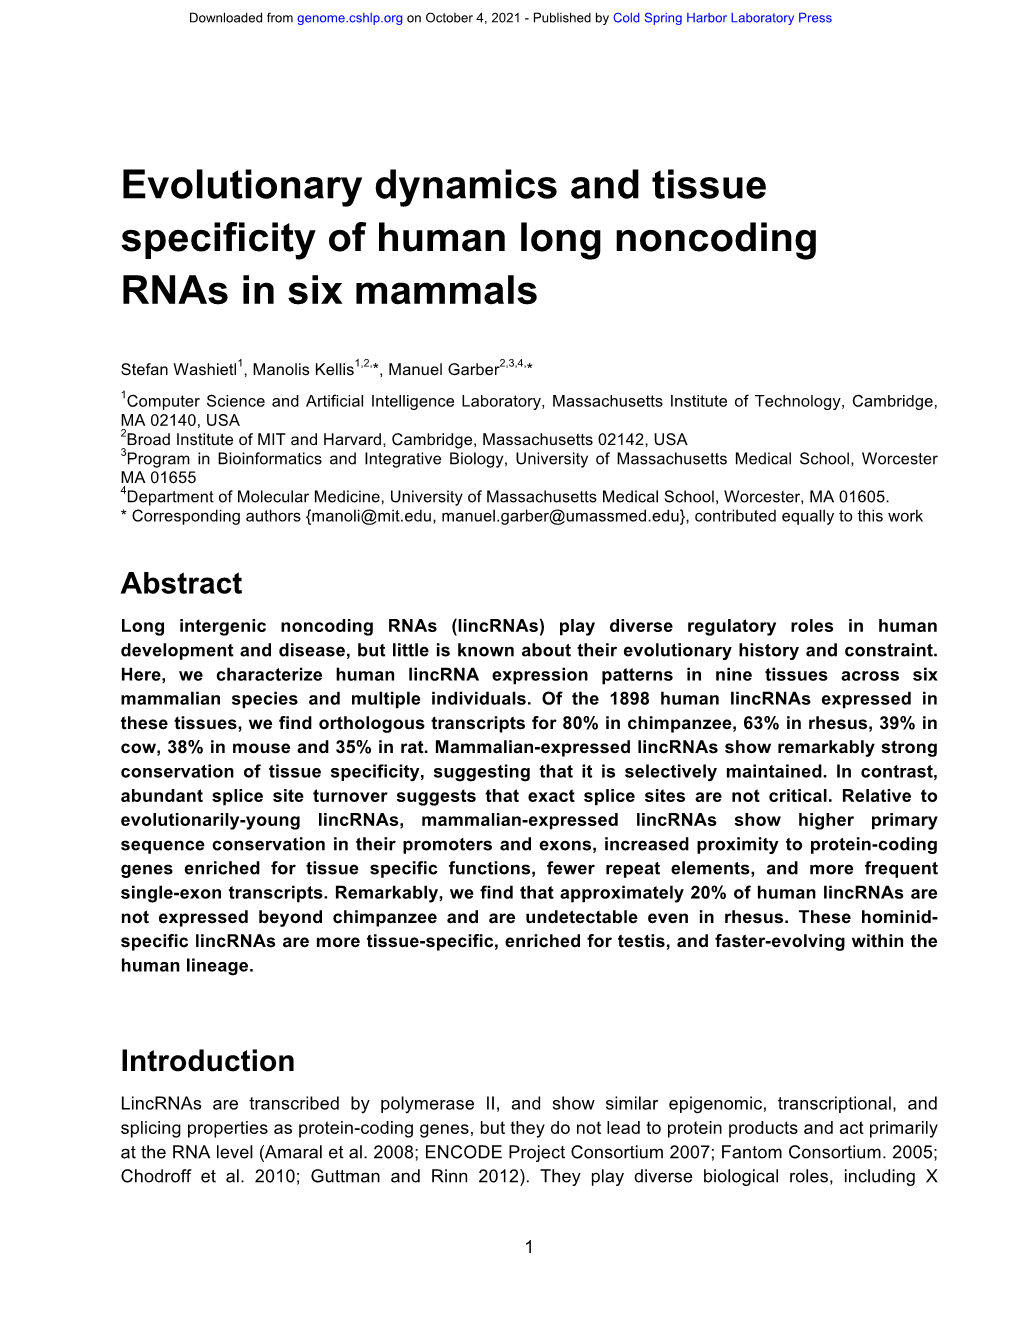 Evolutionary Dynamics and Tissue Specificity of Human Long Noncoding Rnas in Six Mammals